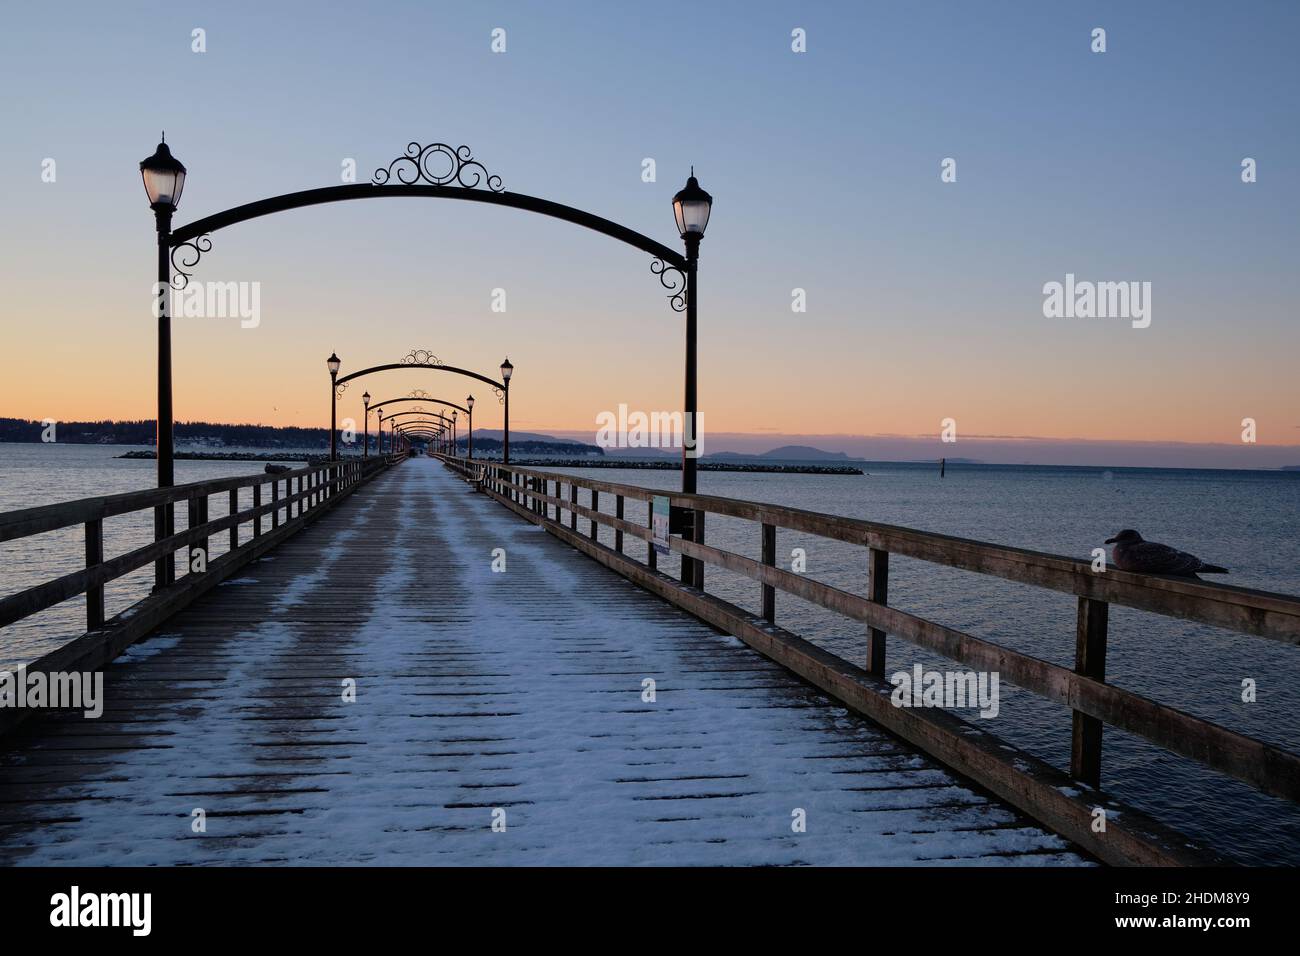 Thin covering of snow frosts wooden planks of White Rock's pier as soft pre-dawn light spreads over the scene on this quiet, cold, winter morning. Stock Photo